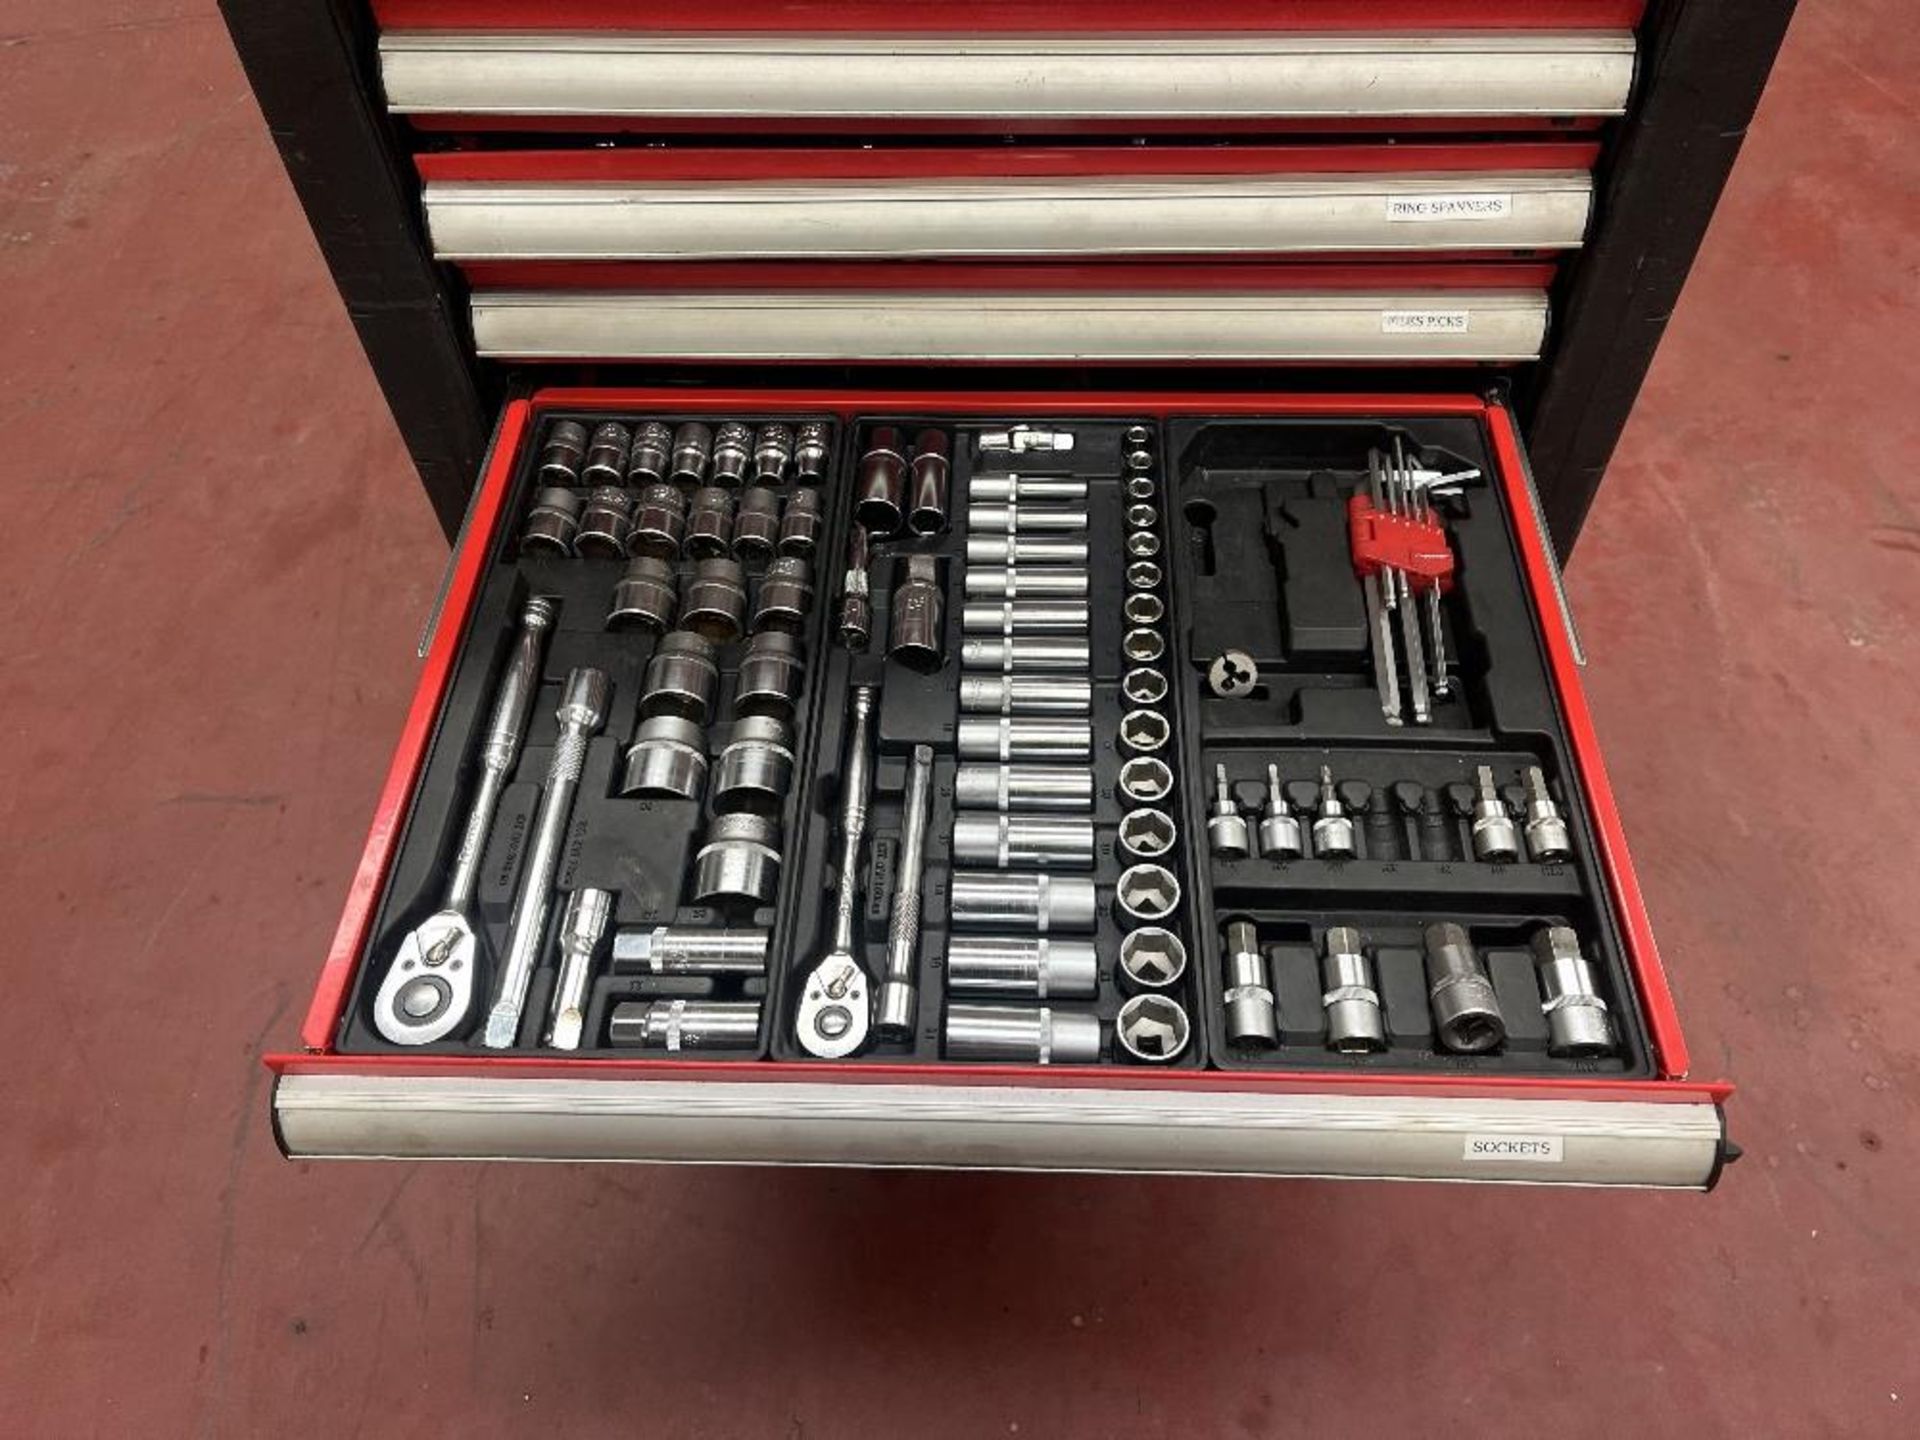 Mobile 8 drawer tool cabinets with contents and fitted vice - Image 9 of 12